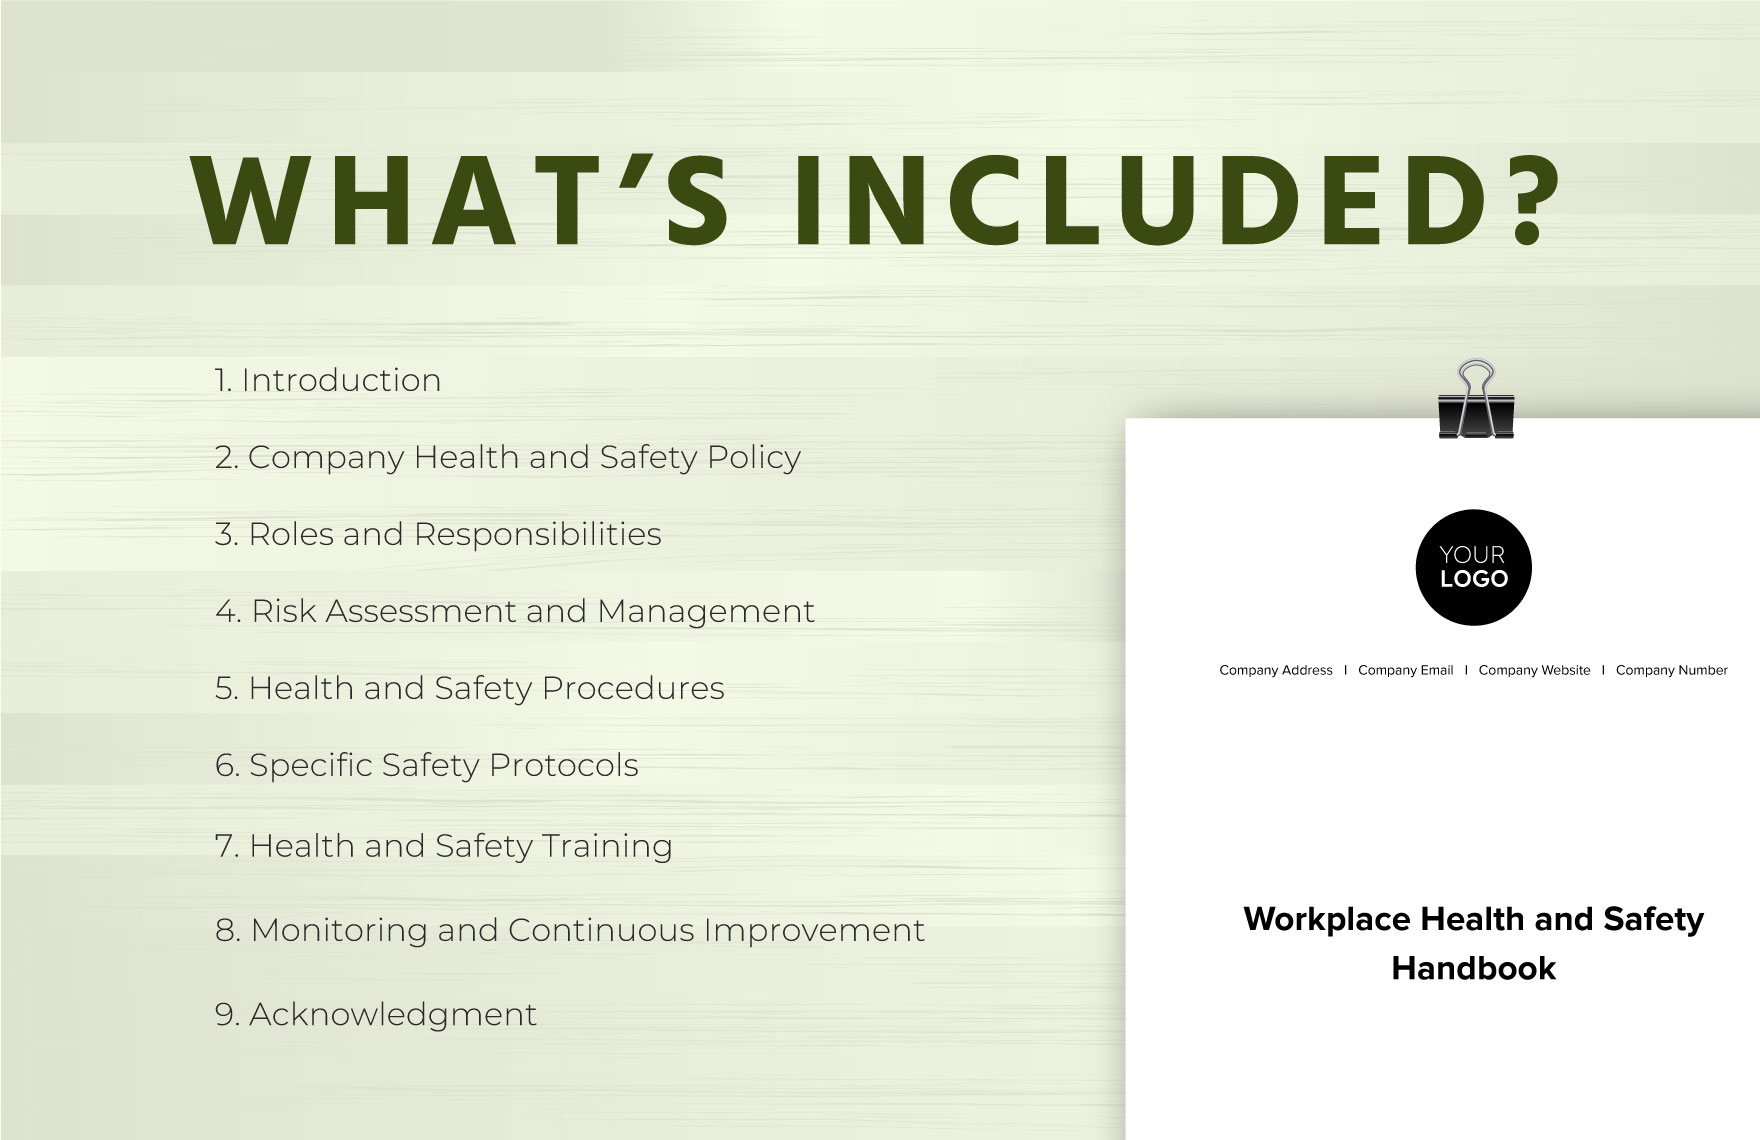 Workplace Health and Safety Handbook Template